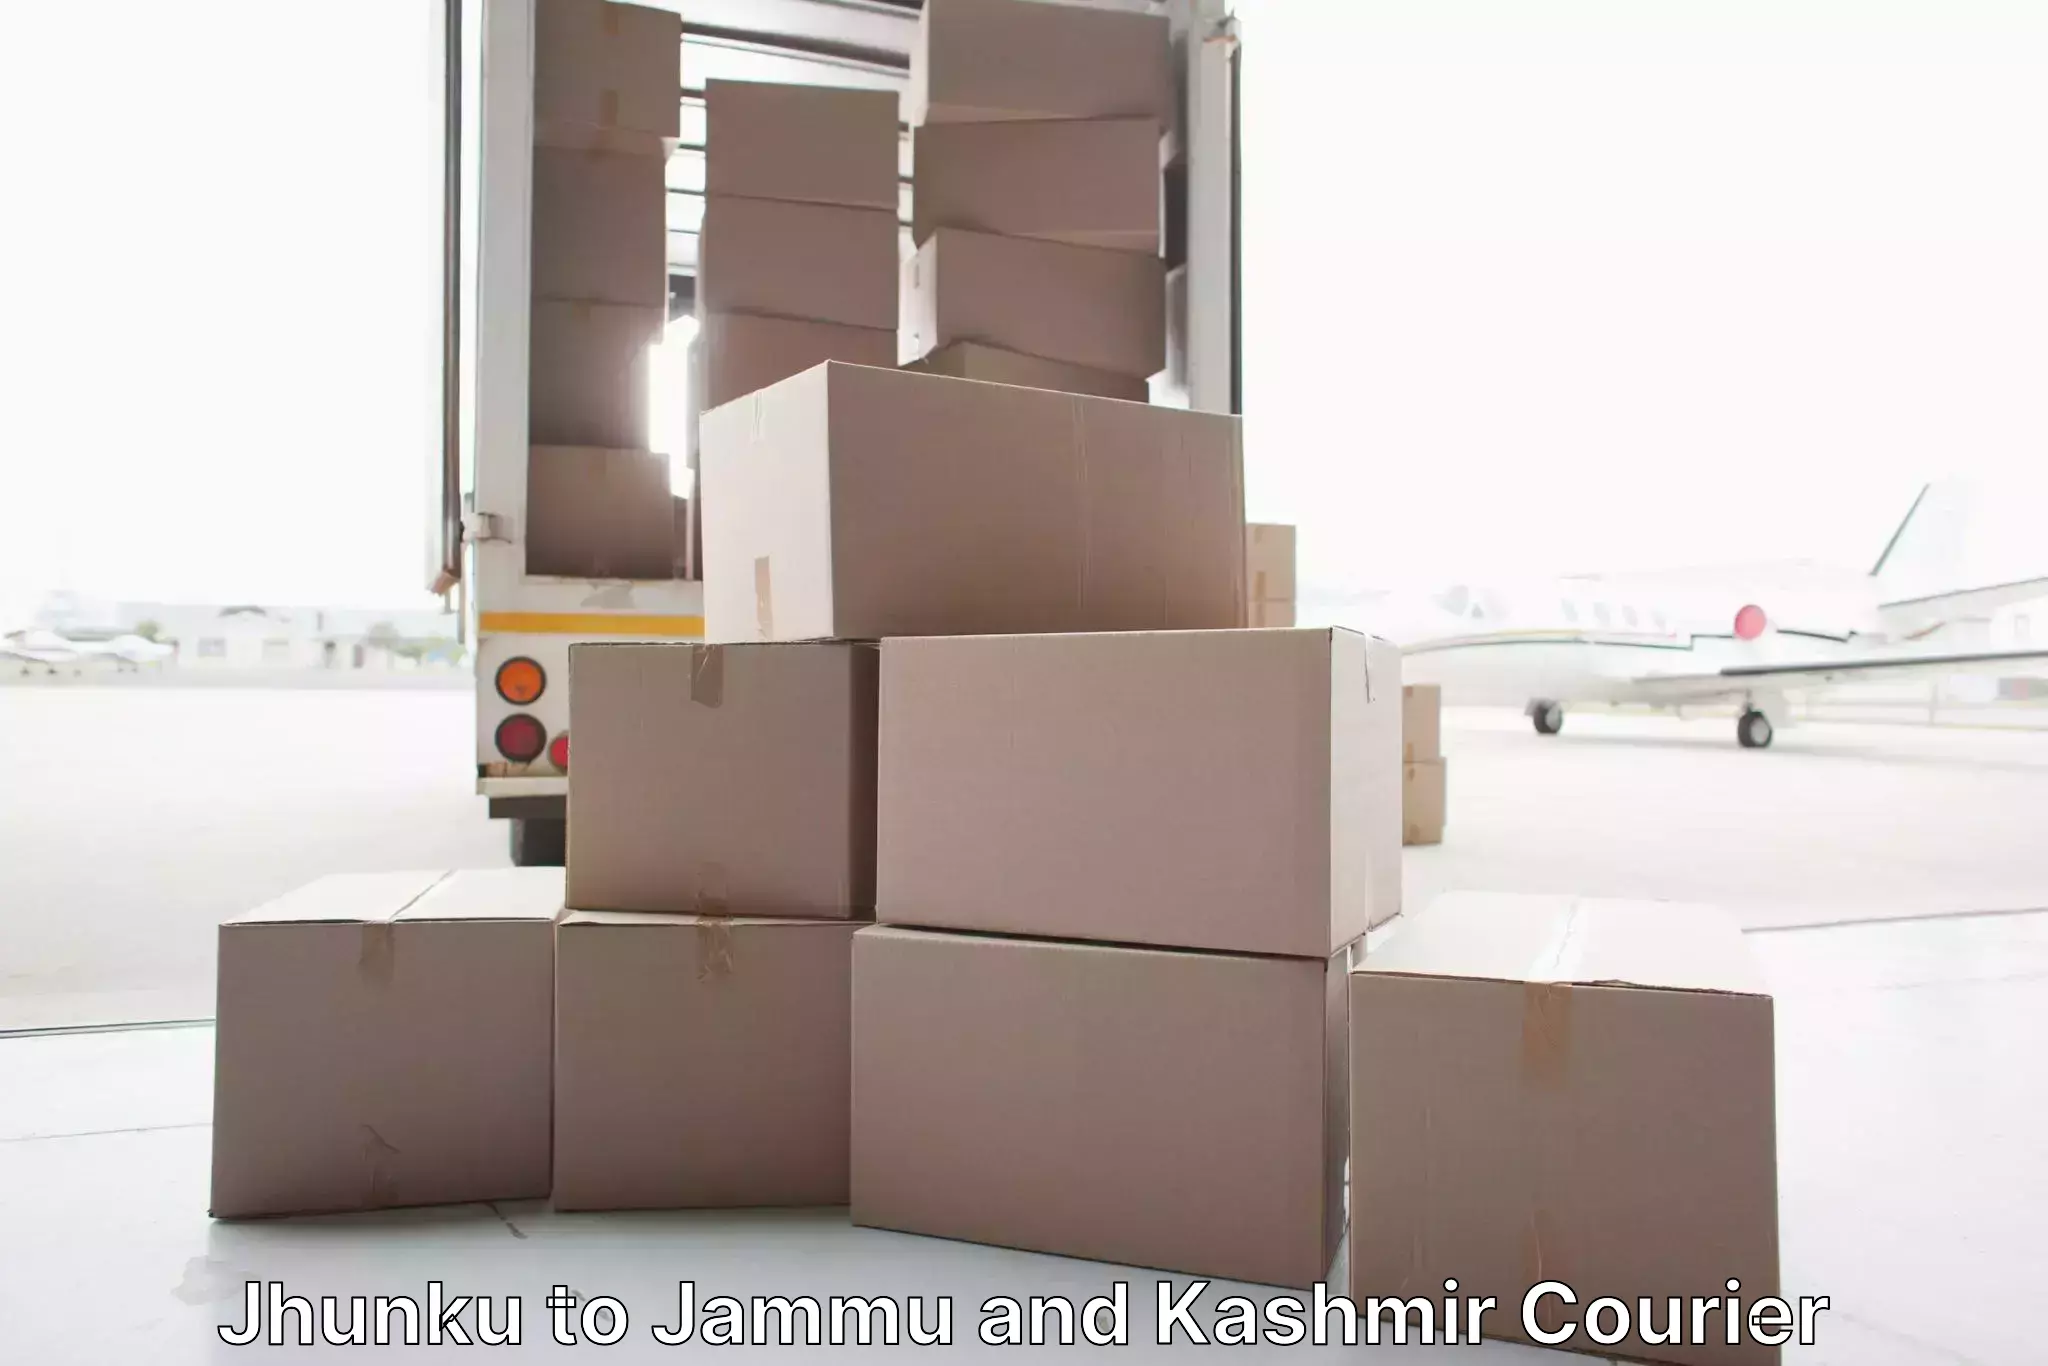 Home relocation experts Jhunku to Udhampur